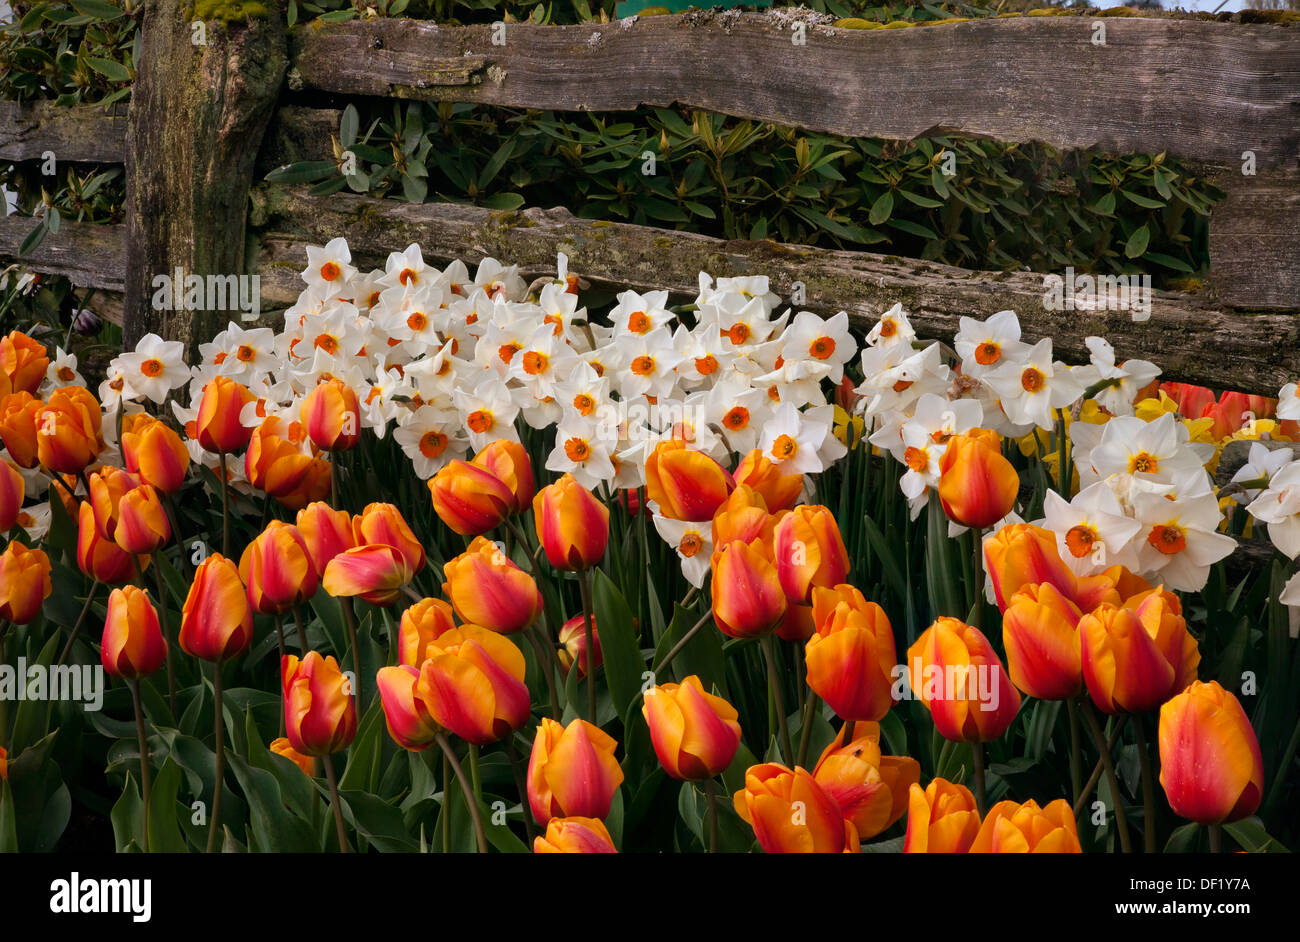 WASHINGTON - Tulips and daffodils blooming next to an old cedar fence at RoozenGaarde Bulb Farm in the Skagit Valley. Stock Photo